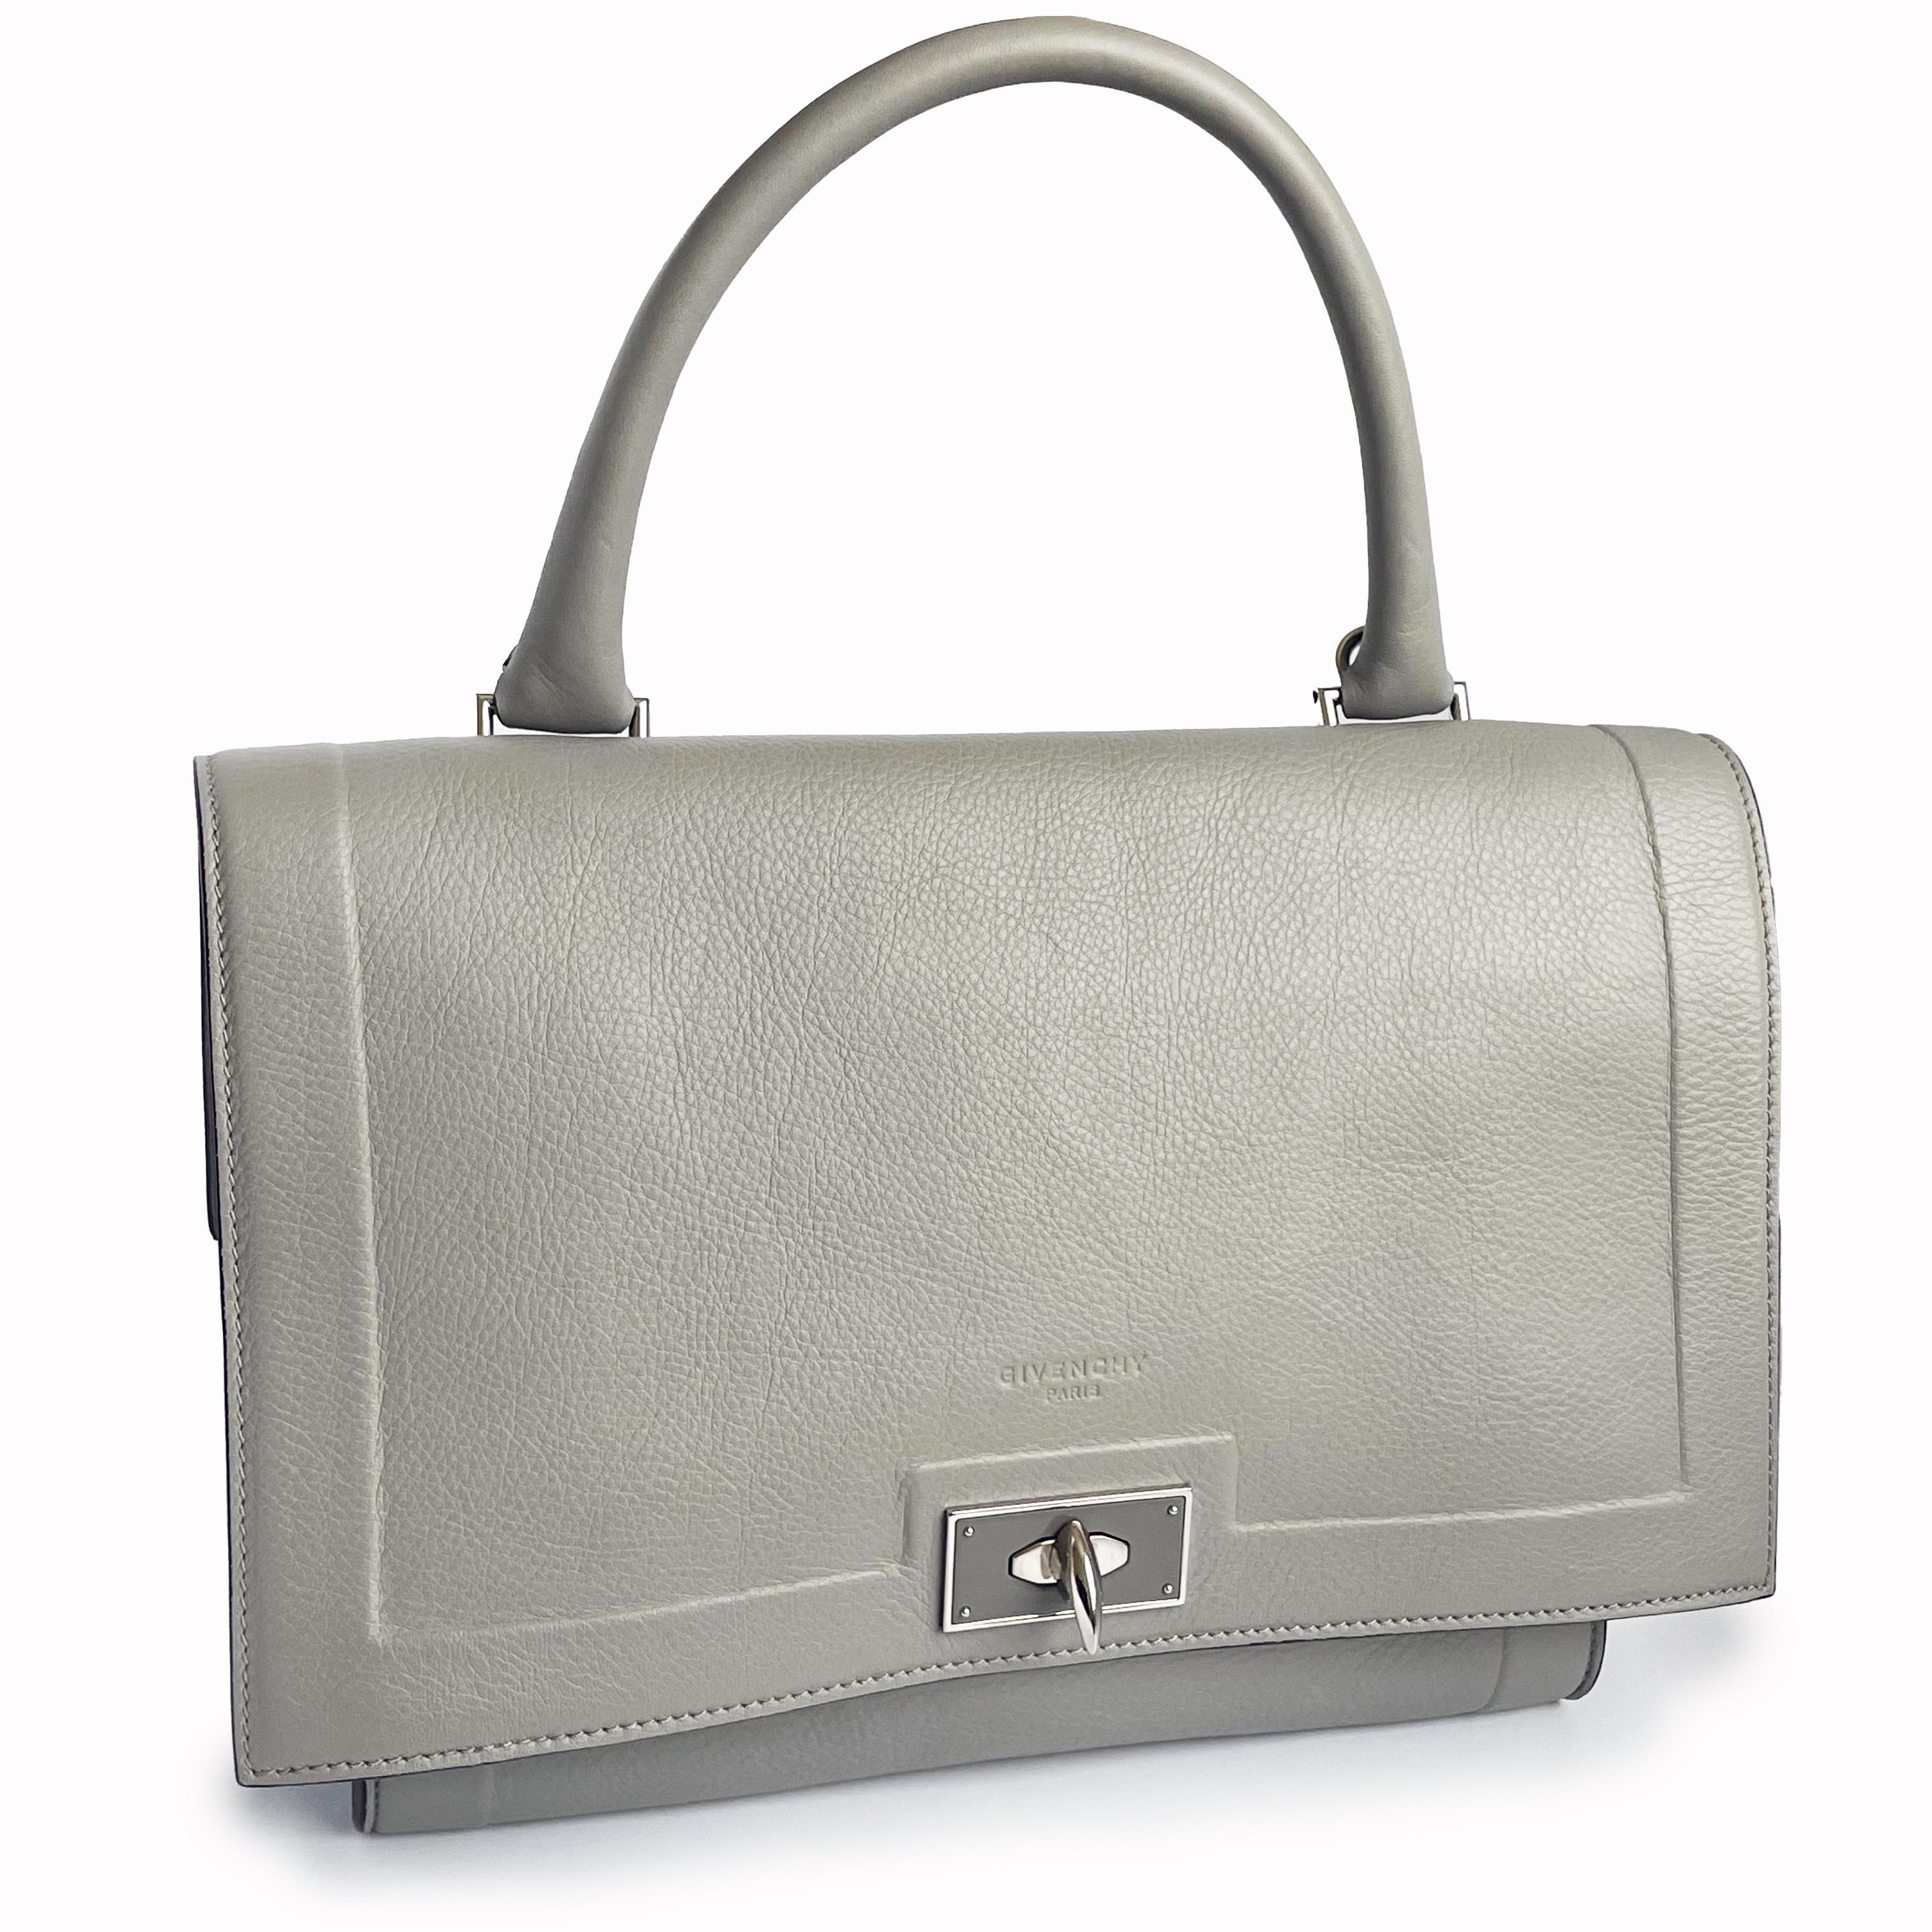 Authentic, preowned Givenchy 'Mini' Shark Tooth satchel or top handle bag. Made from light gray leather, it has a top flap that fastens with a silver metal 